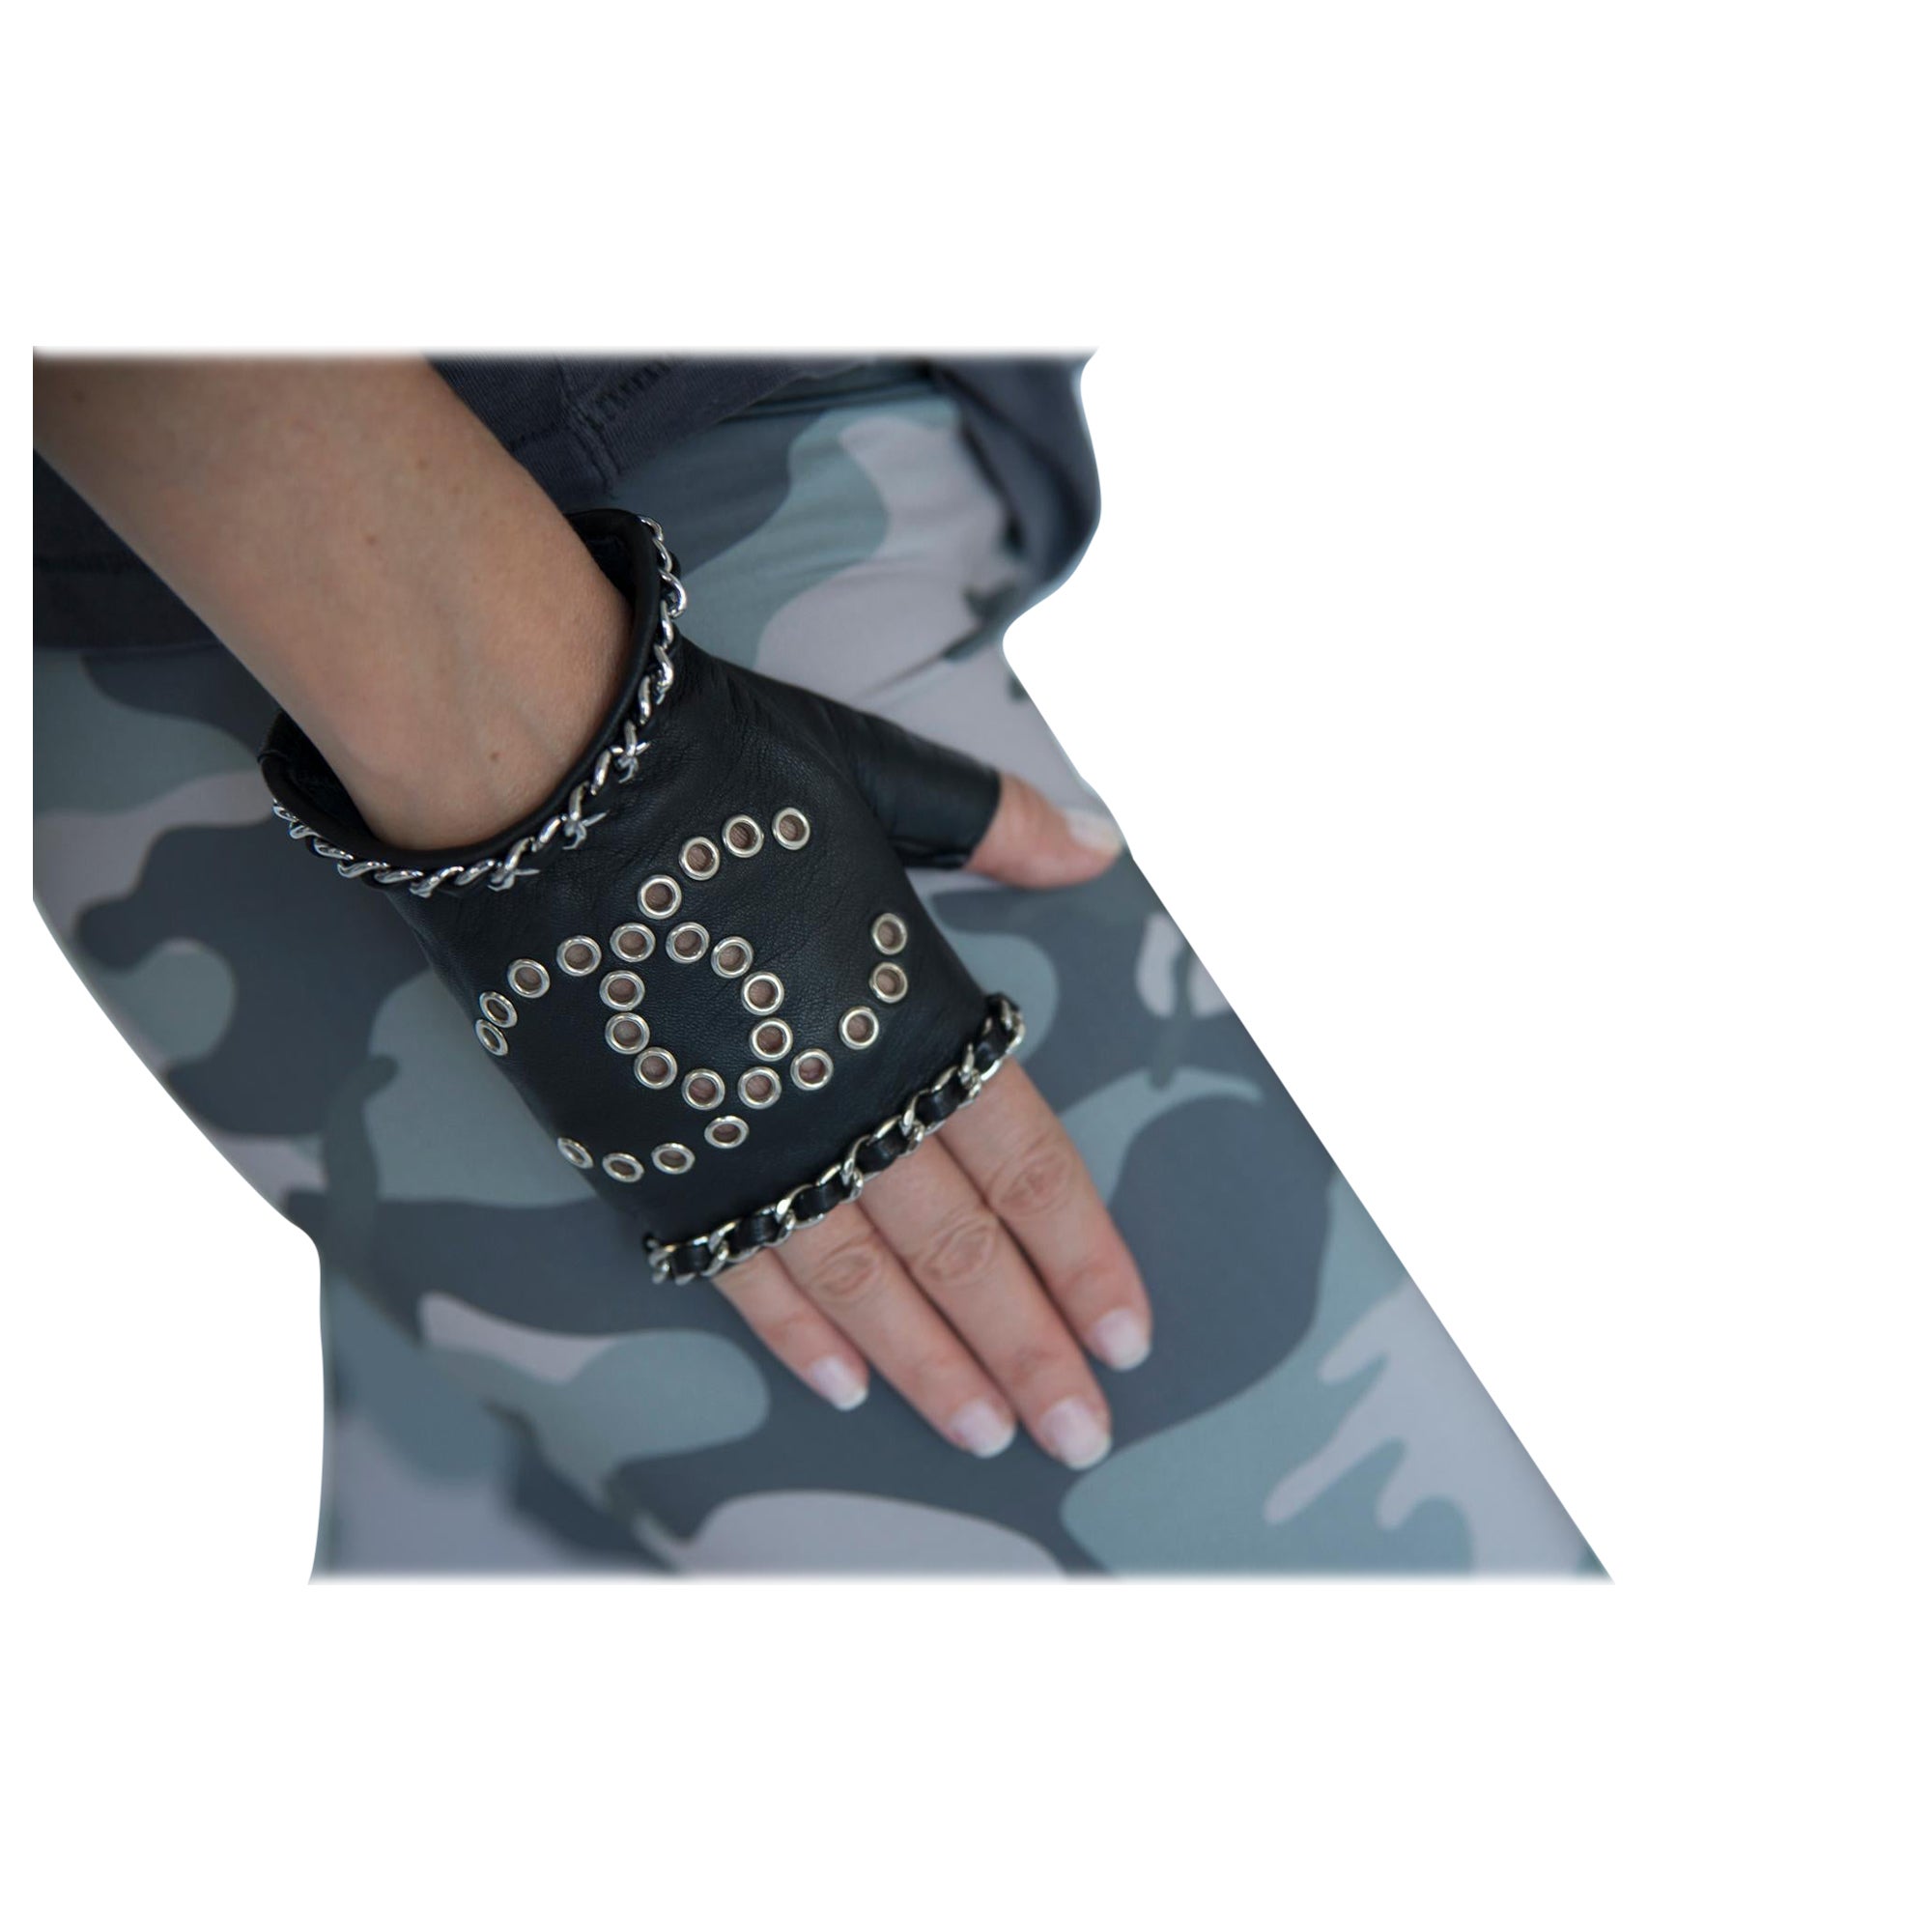 Chanel By Karl Lagerfeld Perforated "CC" Fingerless Leather Glove For Sale